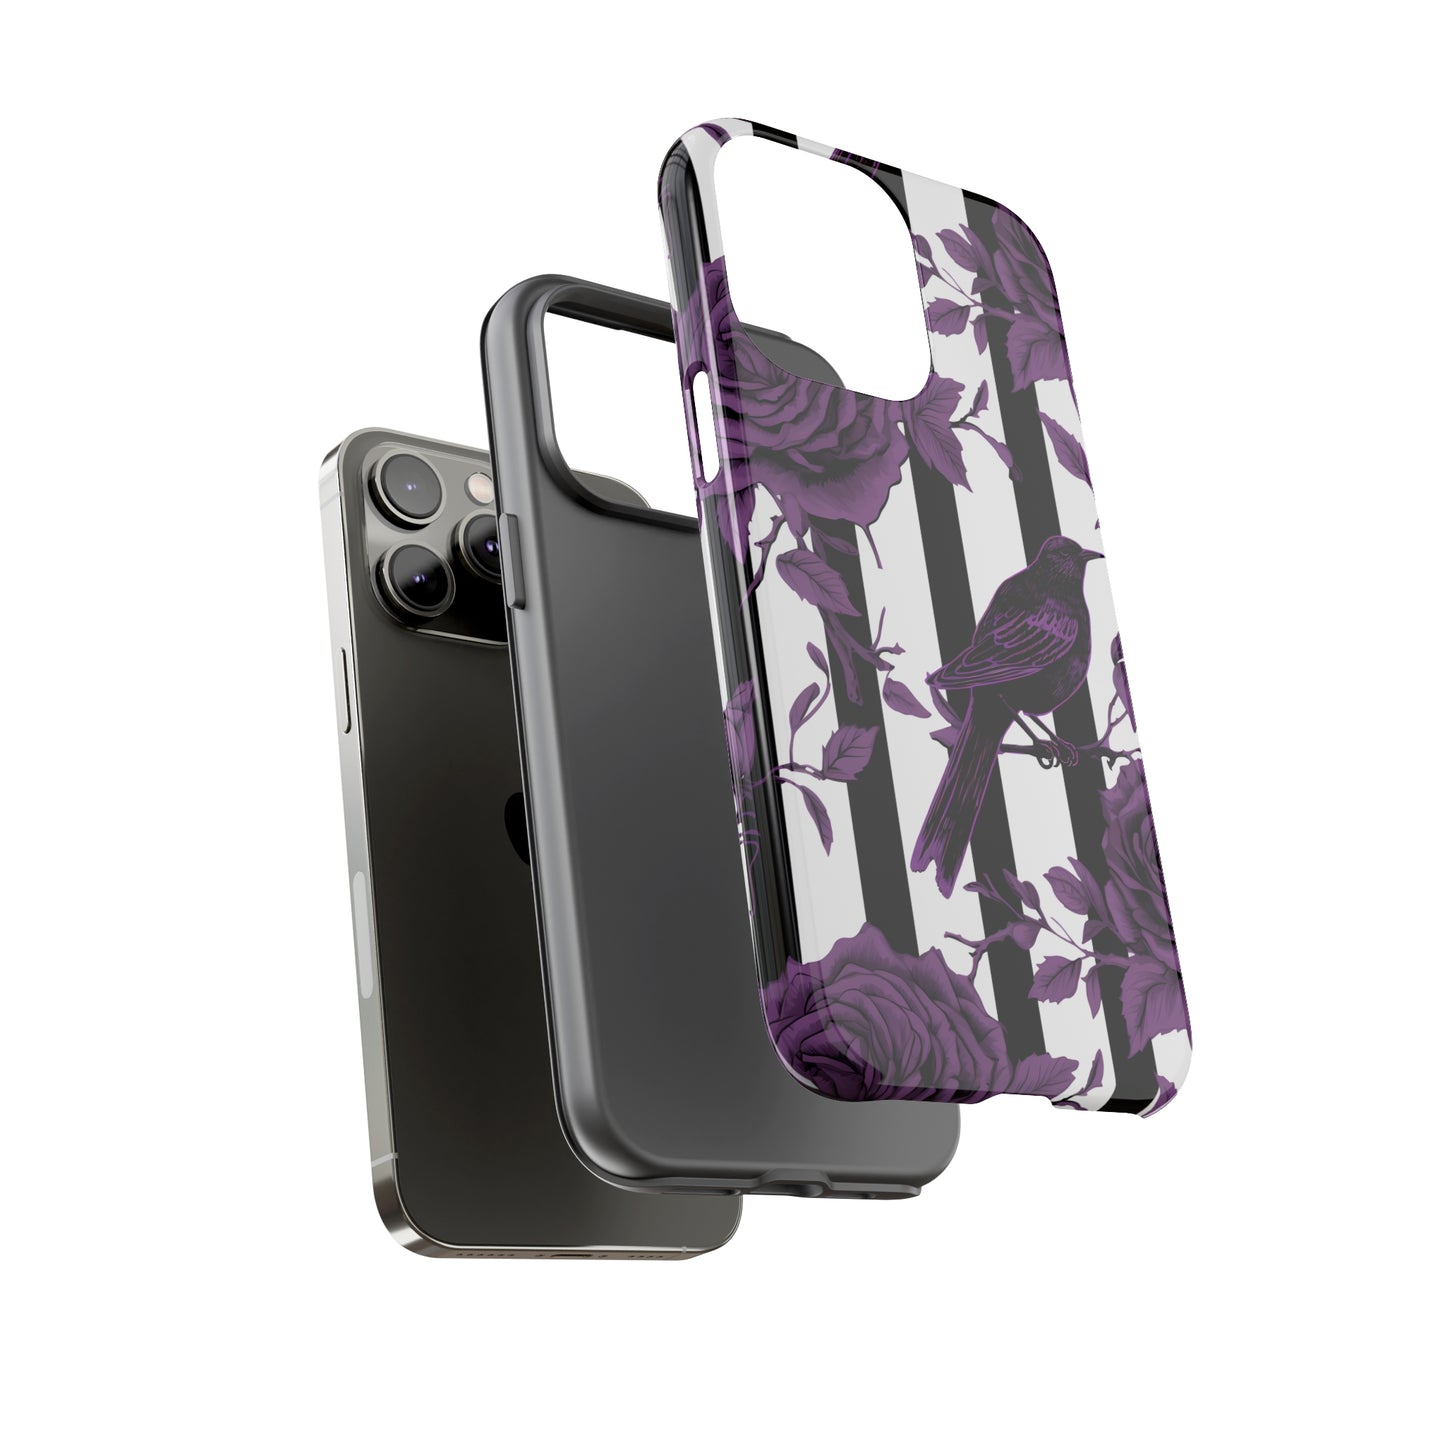 Striped Crows and Roses Tough Cases for iPhone Samsung Google PhonesPhone CaseVTZdesignsGoogle Pixel 6MatteAccessoriescrowsGlossy